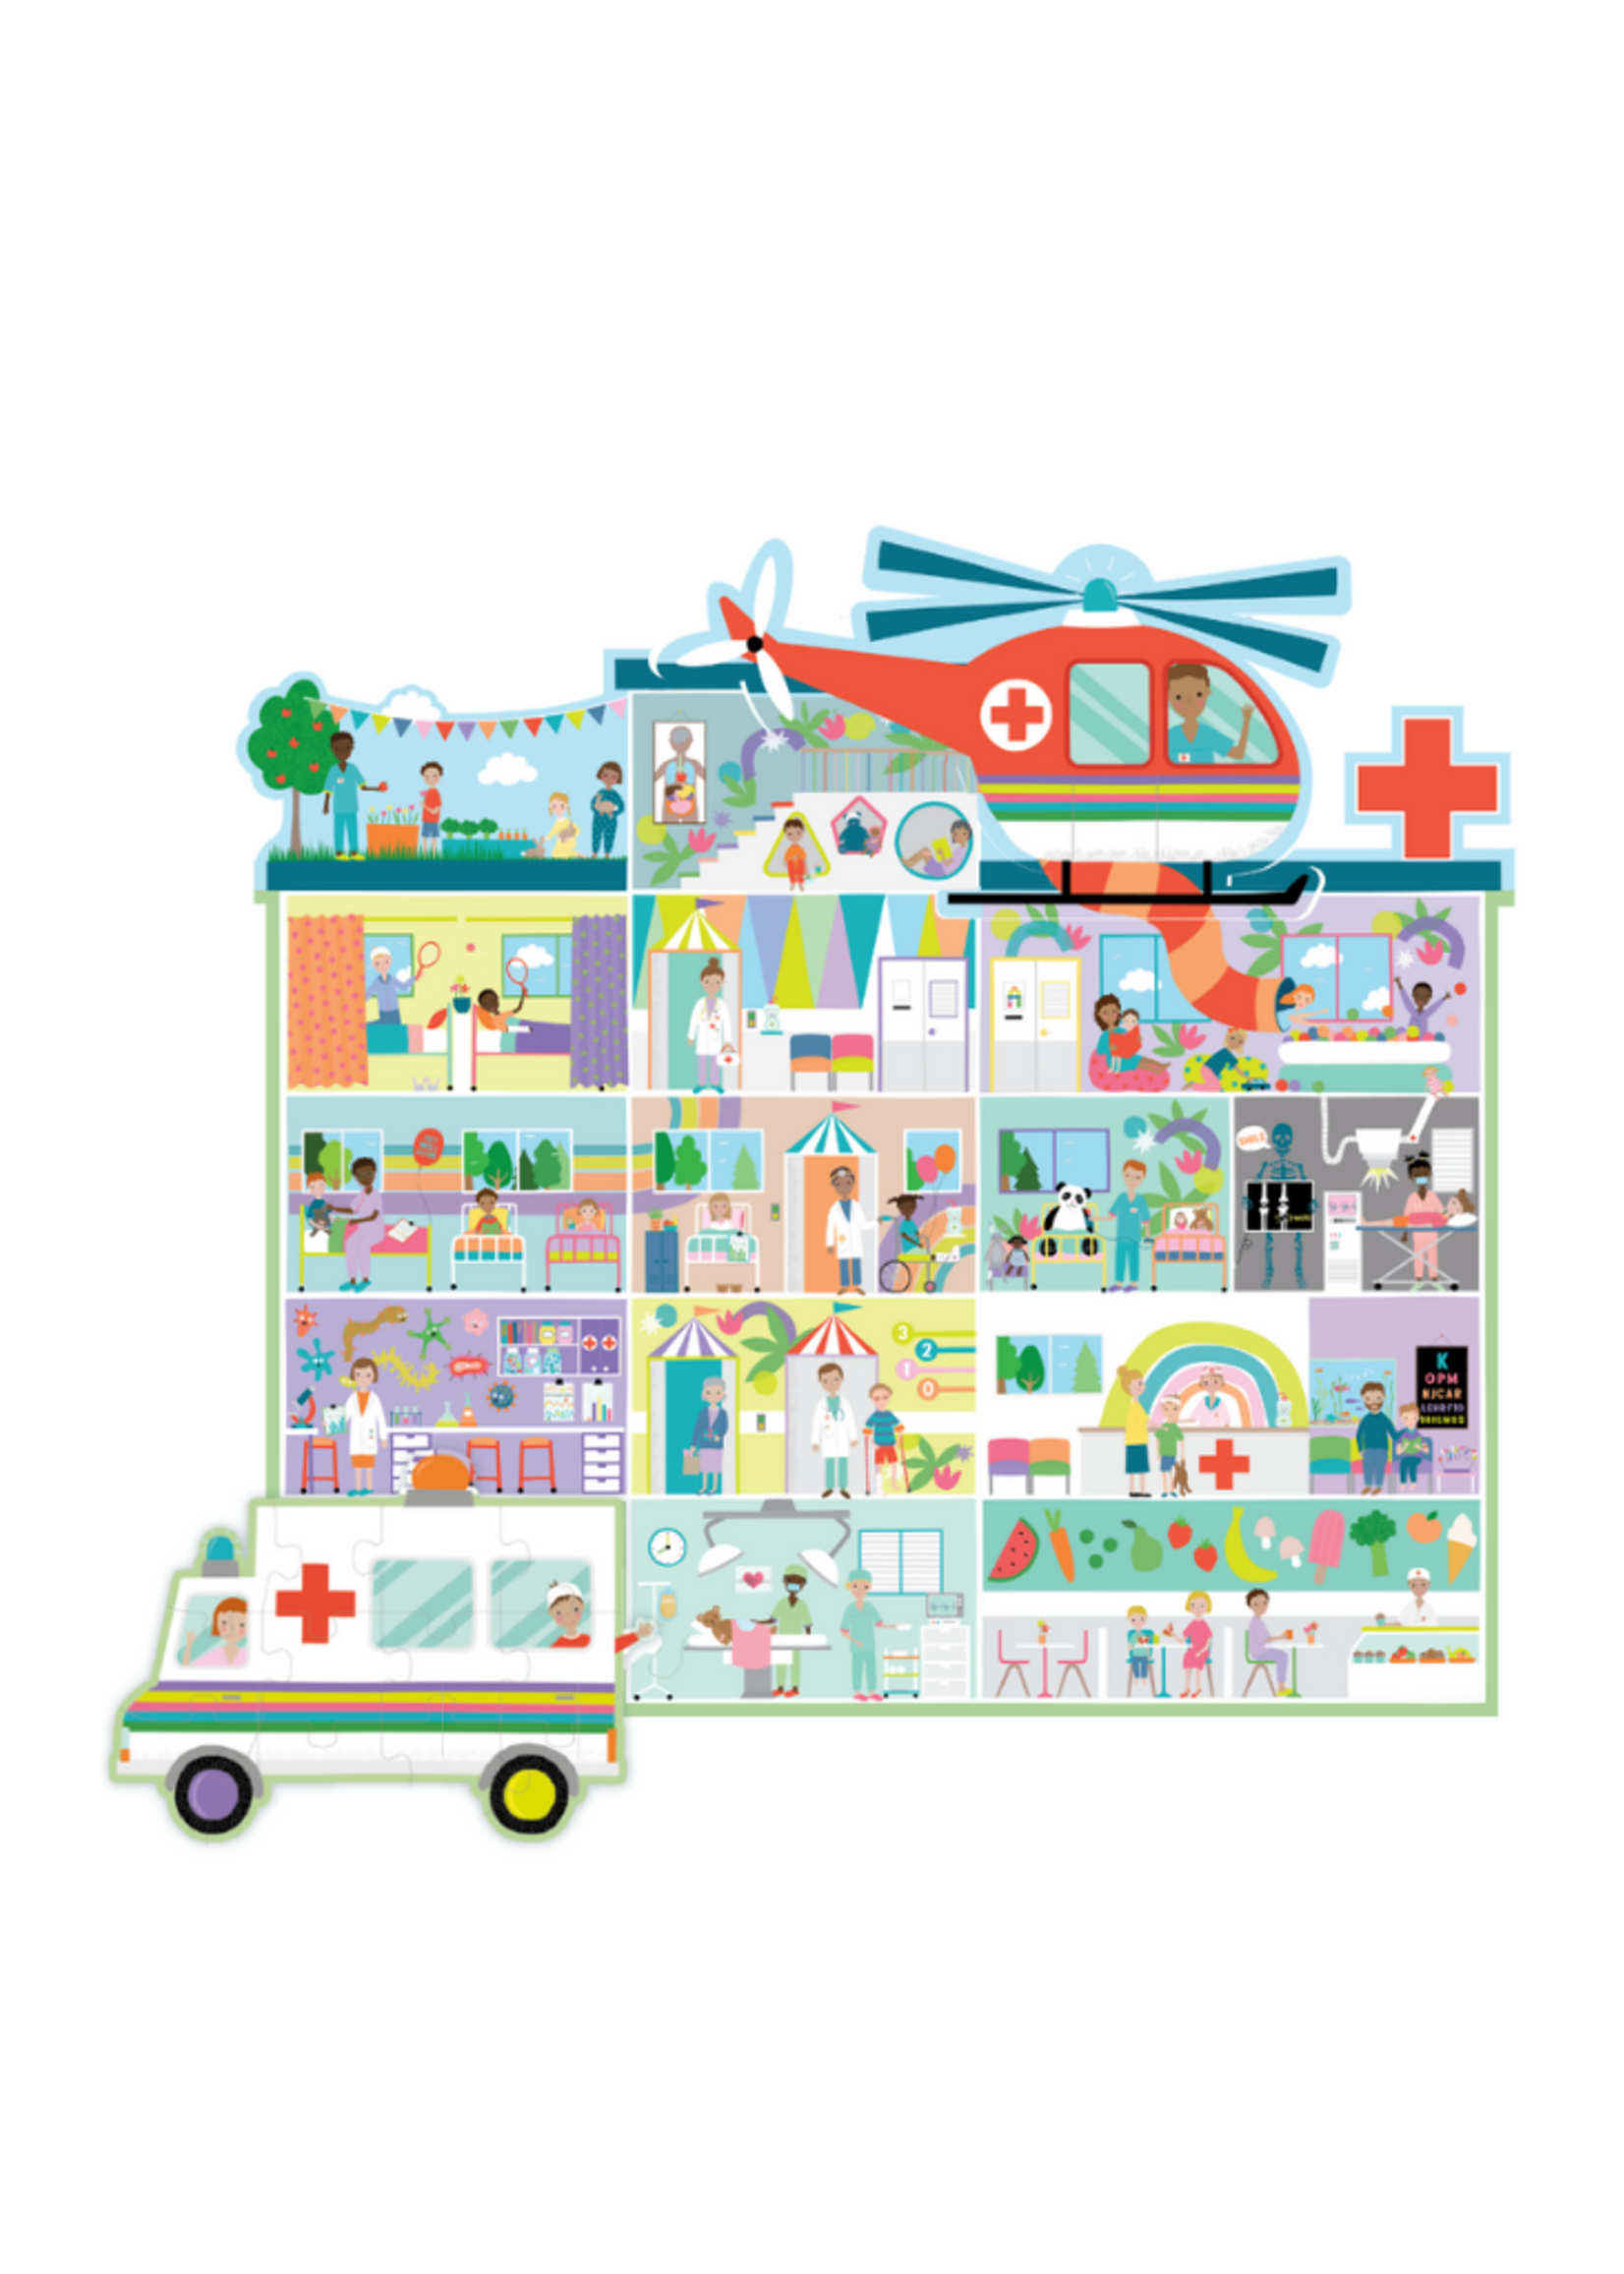 Floss and Rock Happy Hospital 3-in-1 Puzzle